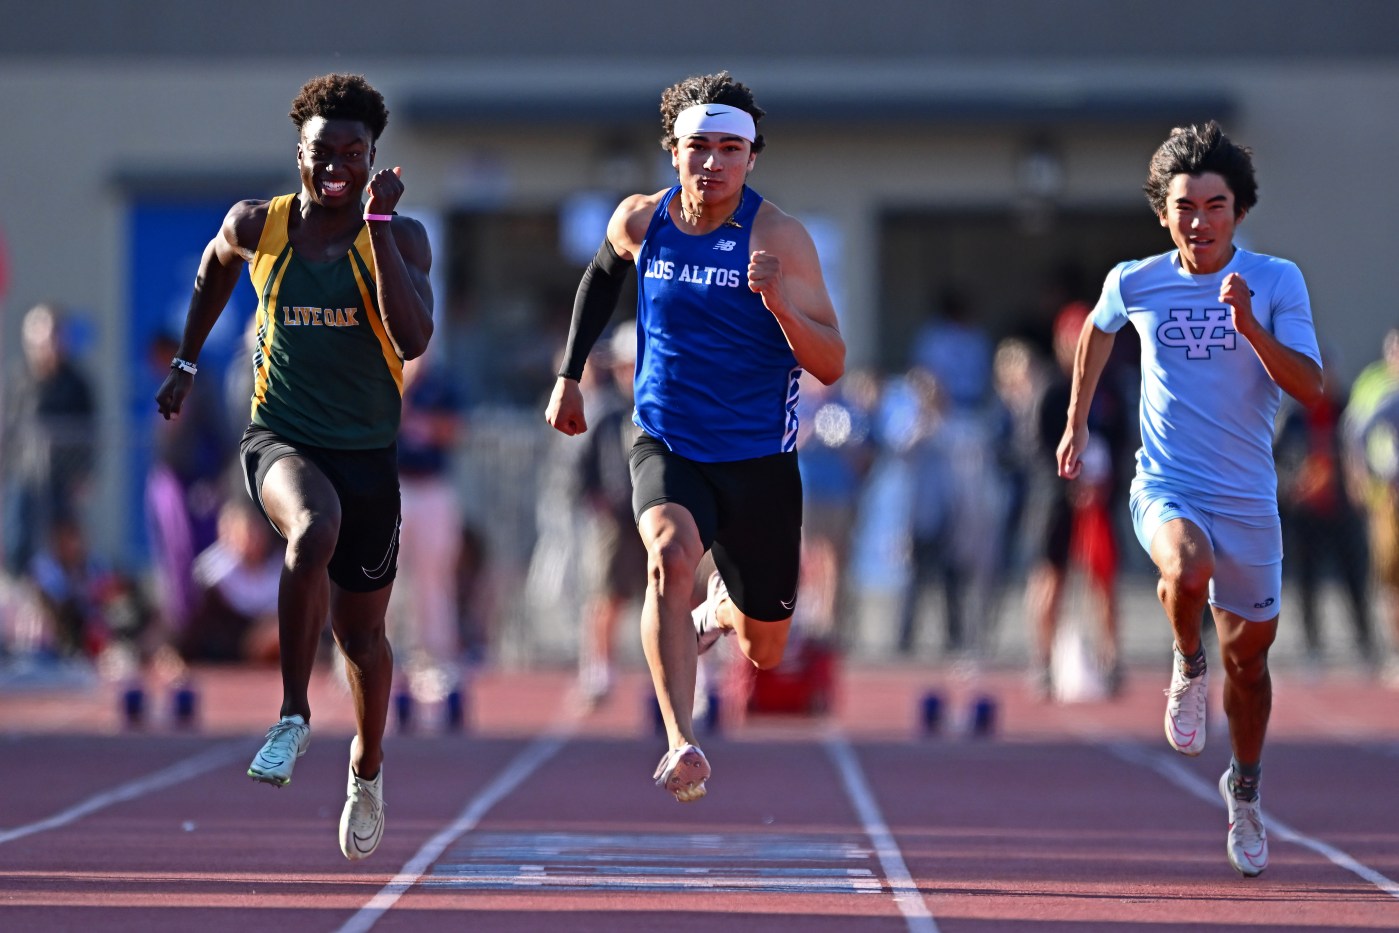 ccs-track-and-field-finals:-los-altos,-mountain-view,-st.-ignatius,-mitty,-palo-alto-standouts-among-top-performers